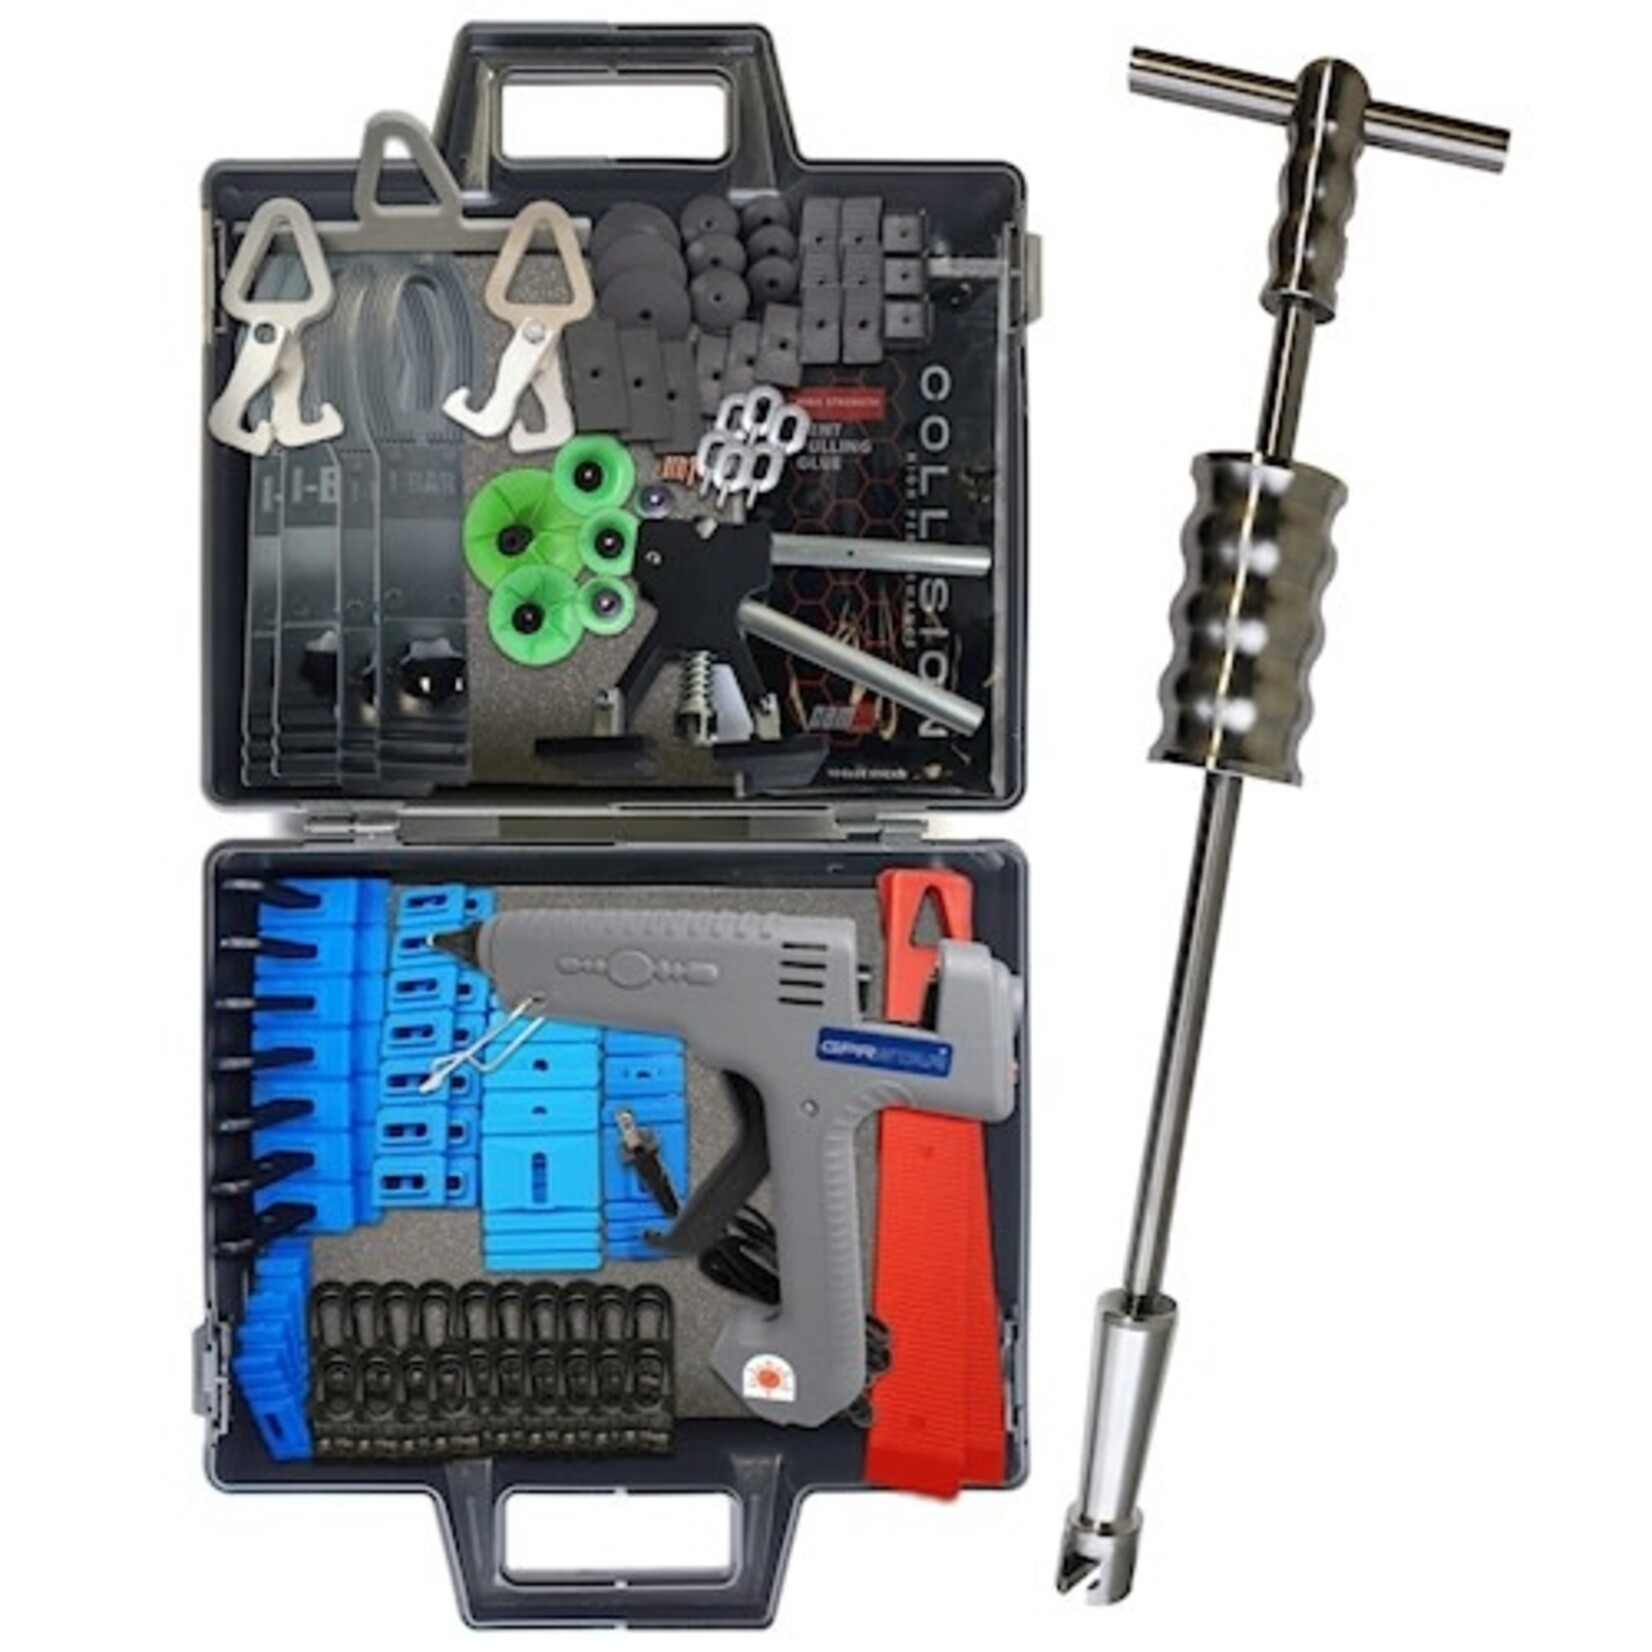 CAMAUTOPRO CAMAUTO BIG KIT is our most popular kit, best recommended for body shops with one to two technicians that already carry their own pullers.